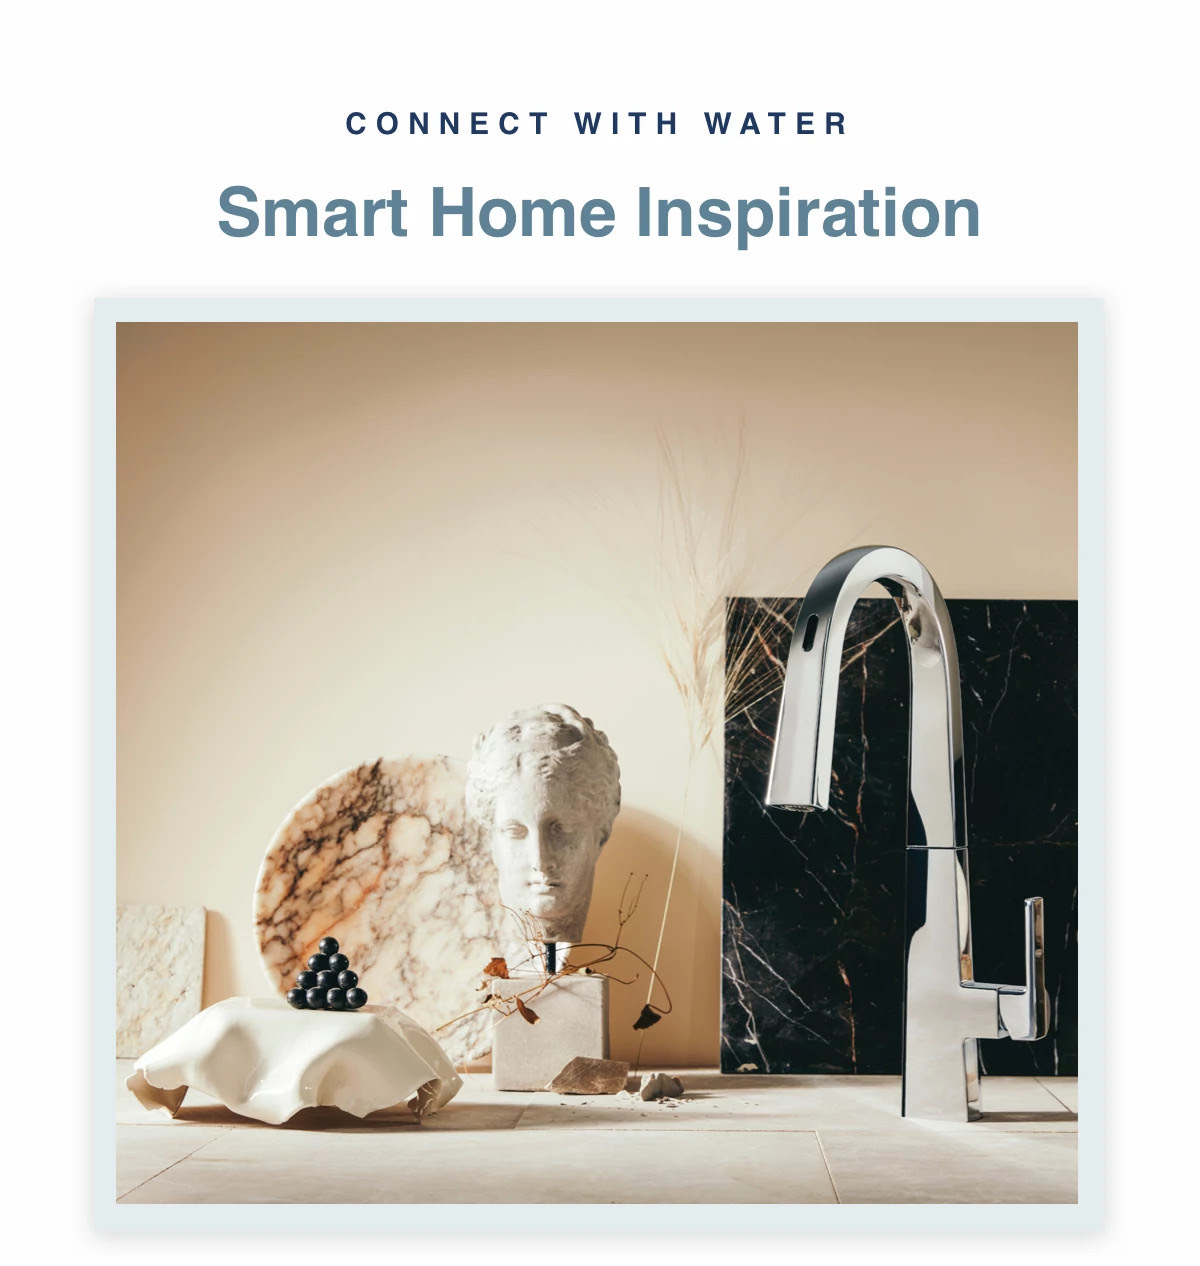 Connect with Water - Smart Home Inspiration